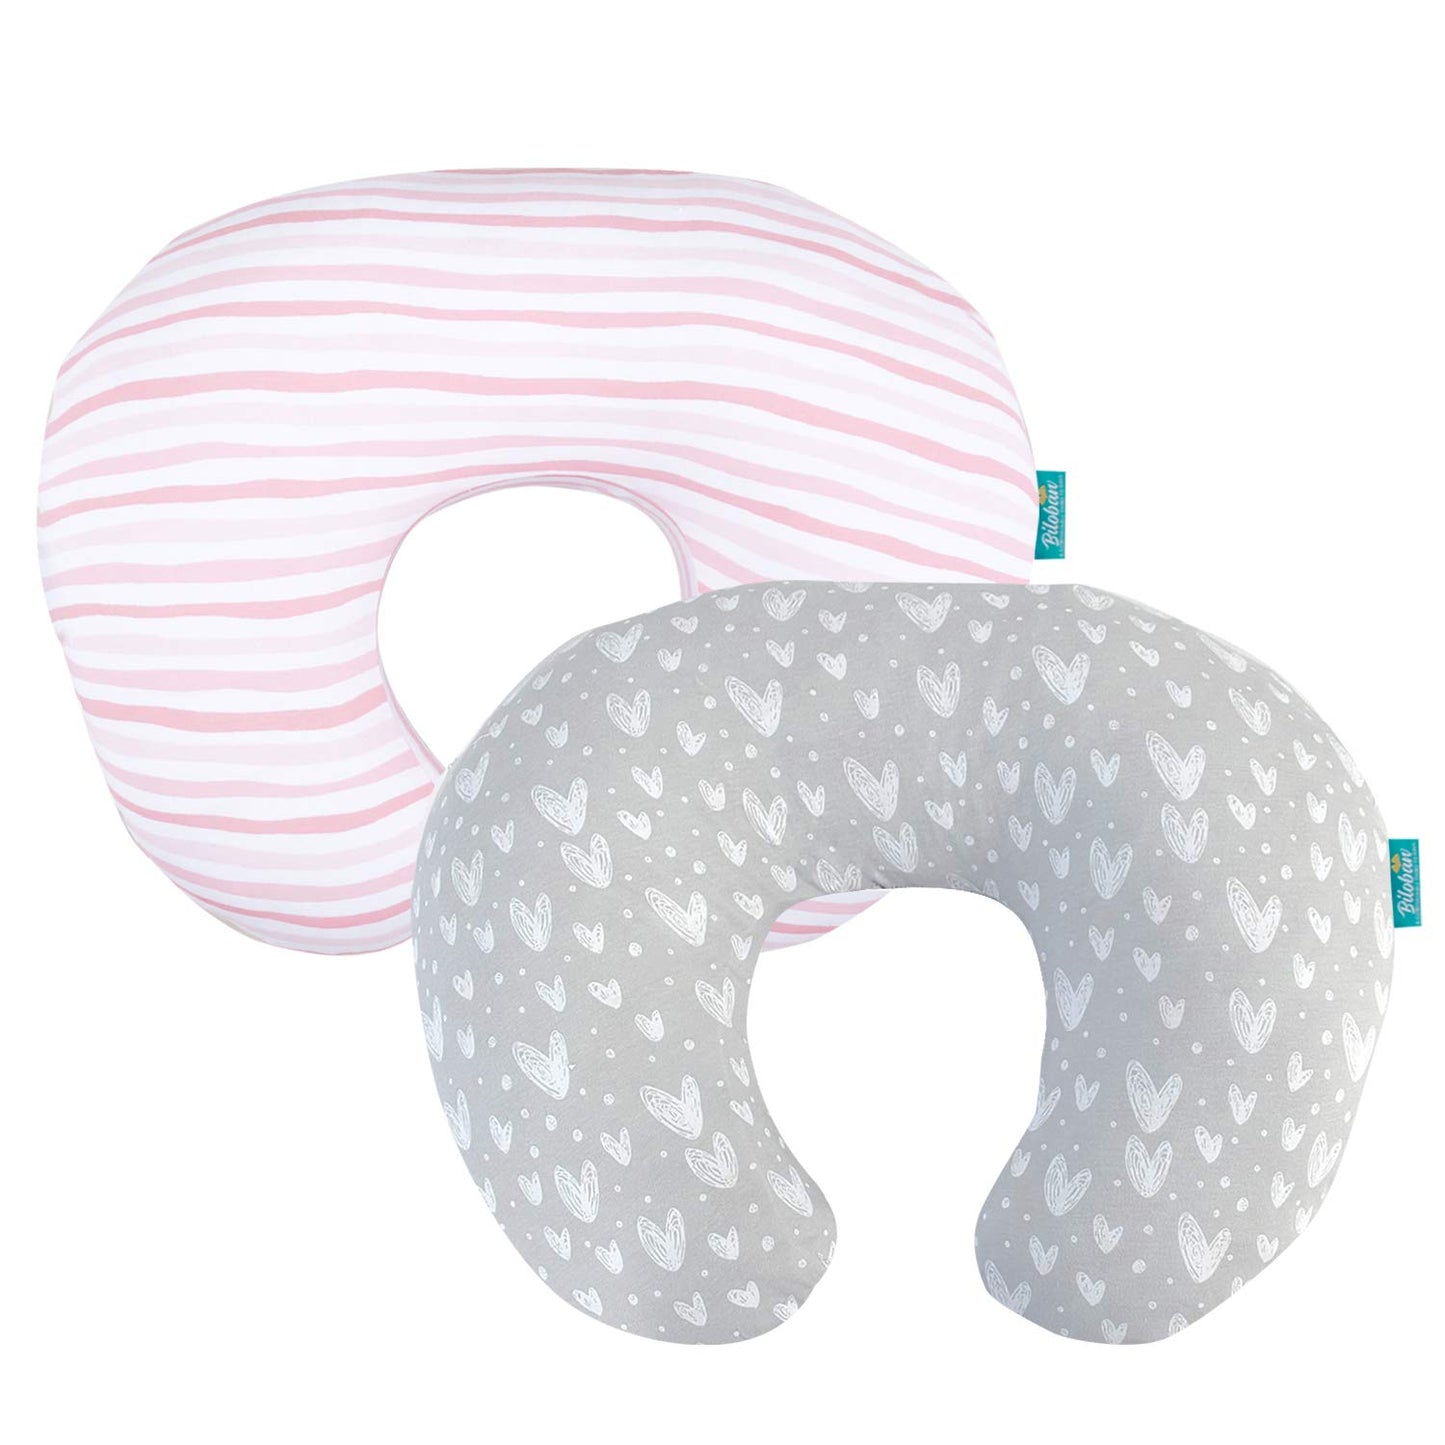 Nursing Pillow Cover, 2 Pack,Pink and Gray, Stretchy 100% Jersey Cotton,Nursing Pillow Slipcovers for Moms Breastfeeding and Bottle Feeding Pillow - Biloban Online Store